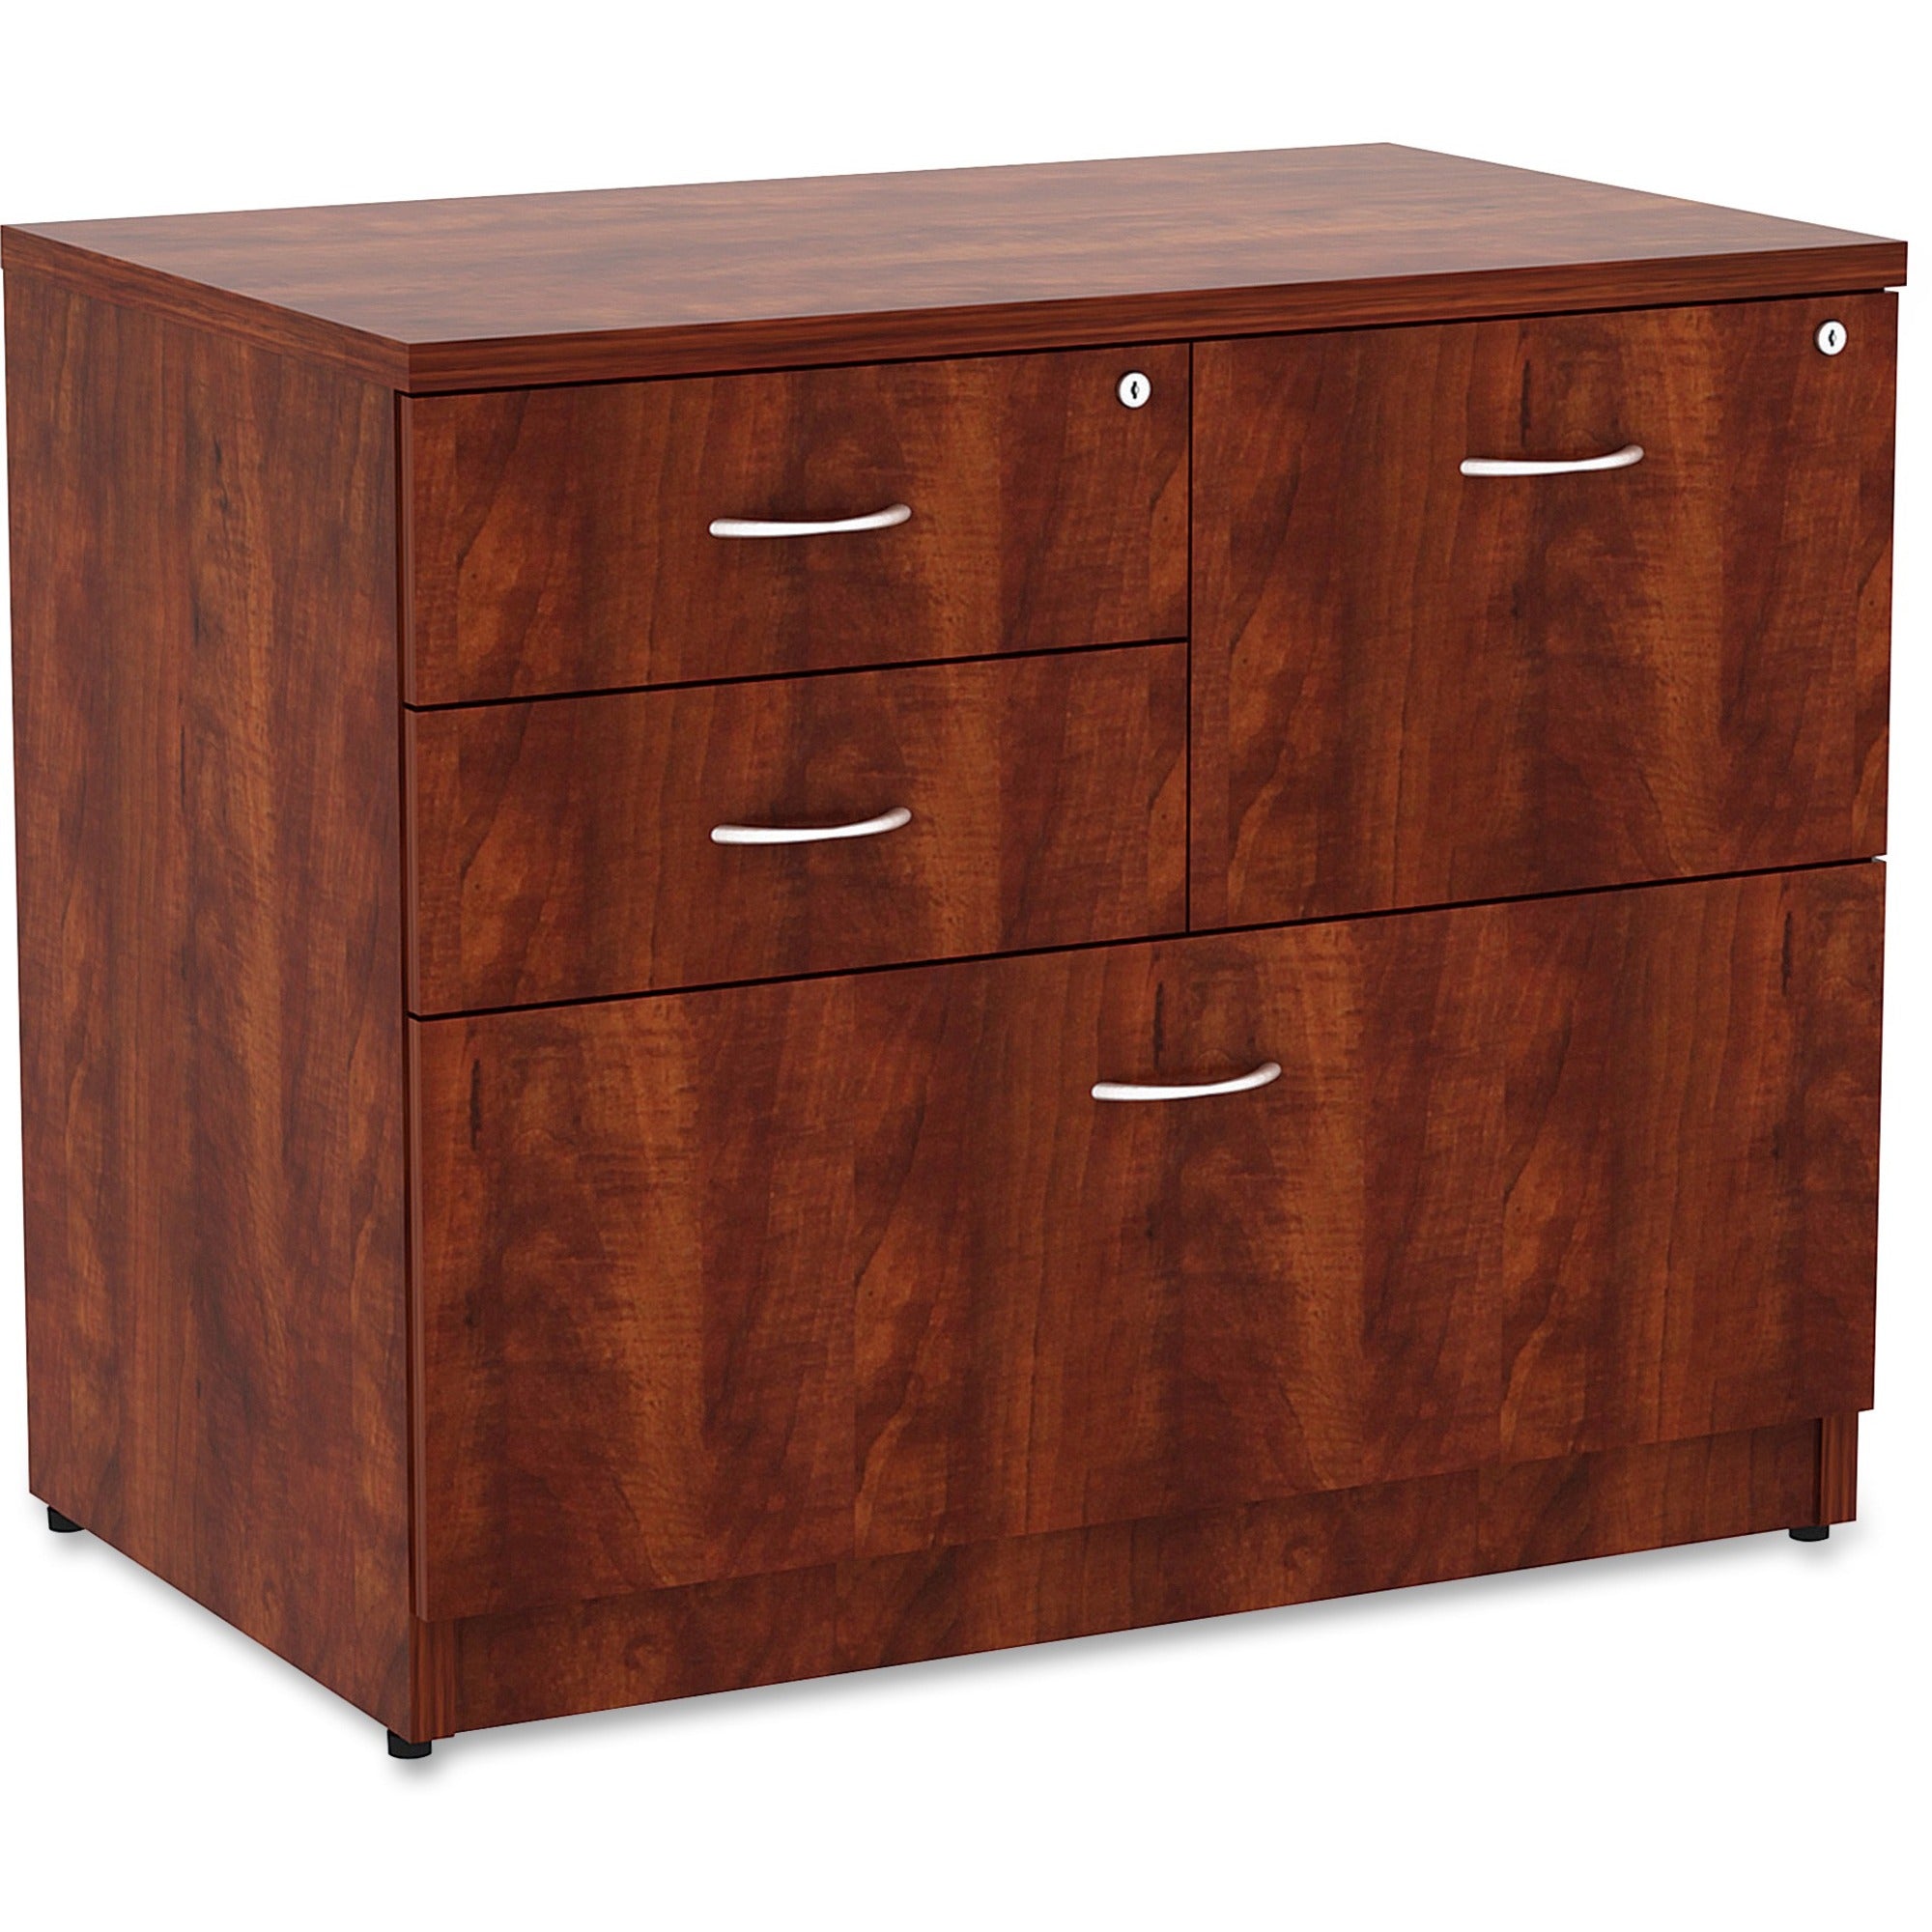 lorell-essentials-series-box-box-file-lateral-file-1-side-panel-01-edge-355-x-22295-lateral-file-4-x-box-file-drawers-cherry-laminate-table-top-versatile-ball-bearing-glide-drawer-extension-security-lock-durable-adjustable-l_llr69540 - 1